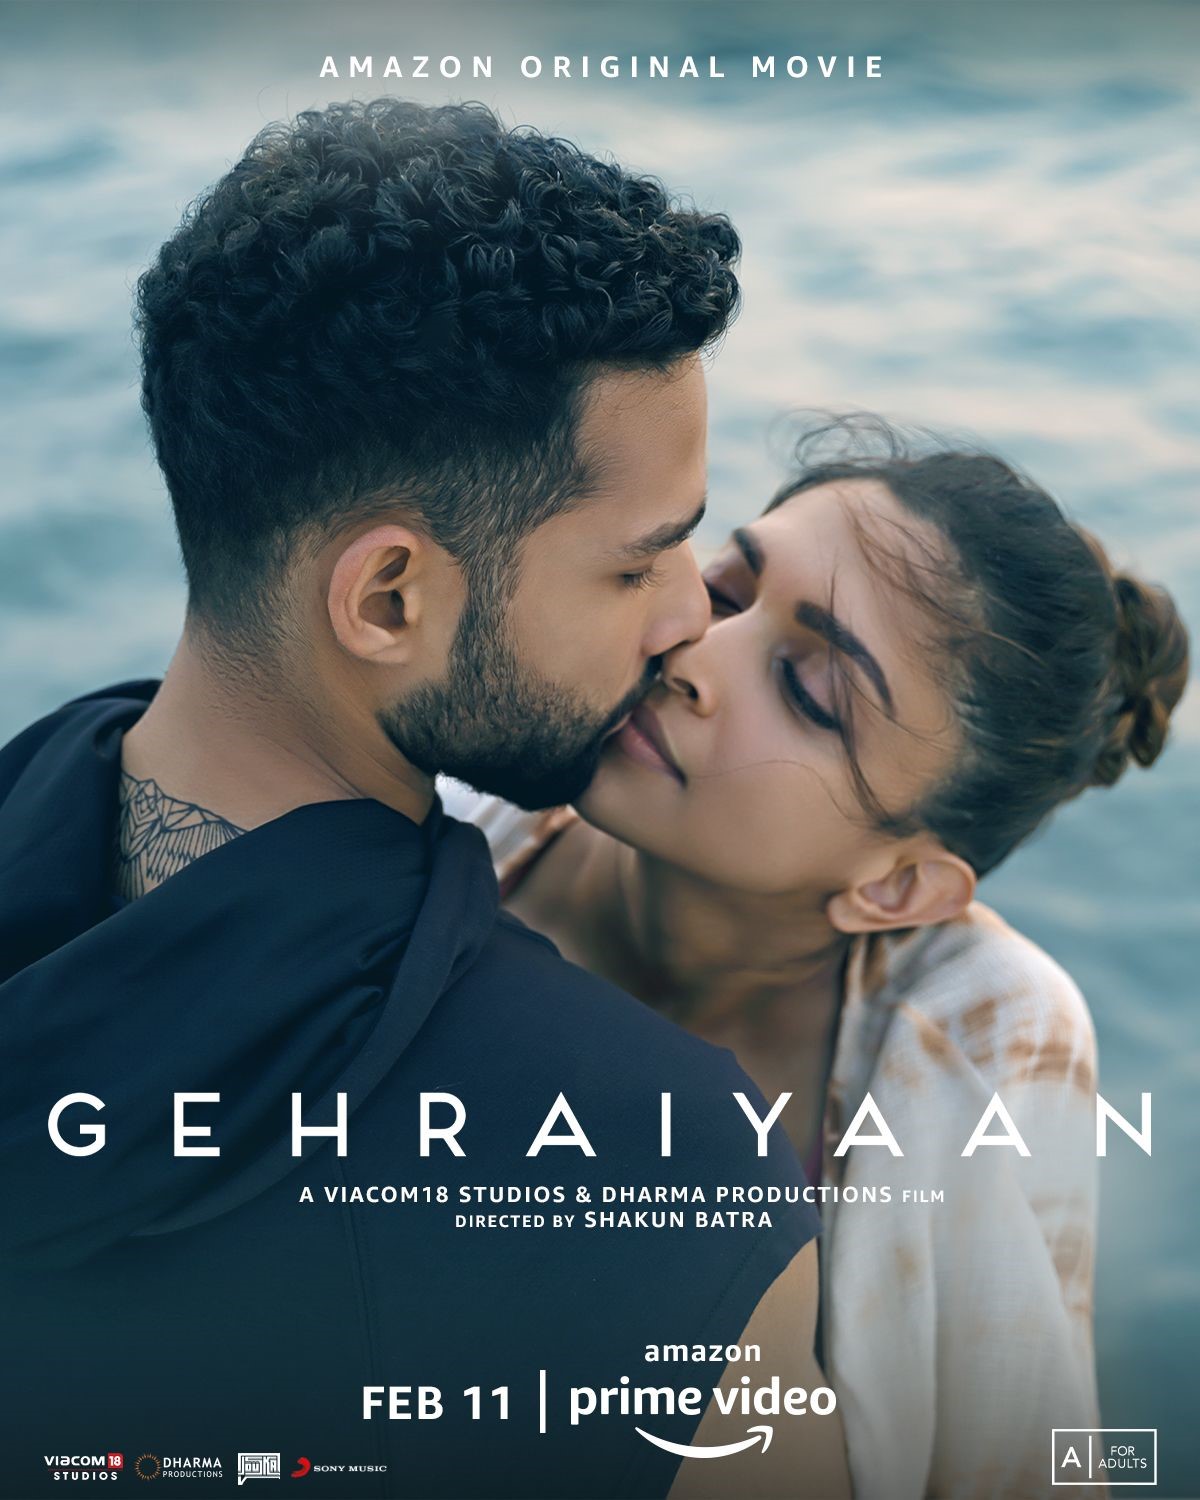 Why Gehraiyaan on Amazon Prime Will Be Better Than Any Other Indian OTT Film